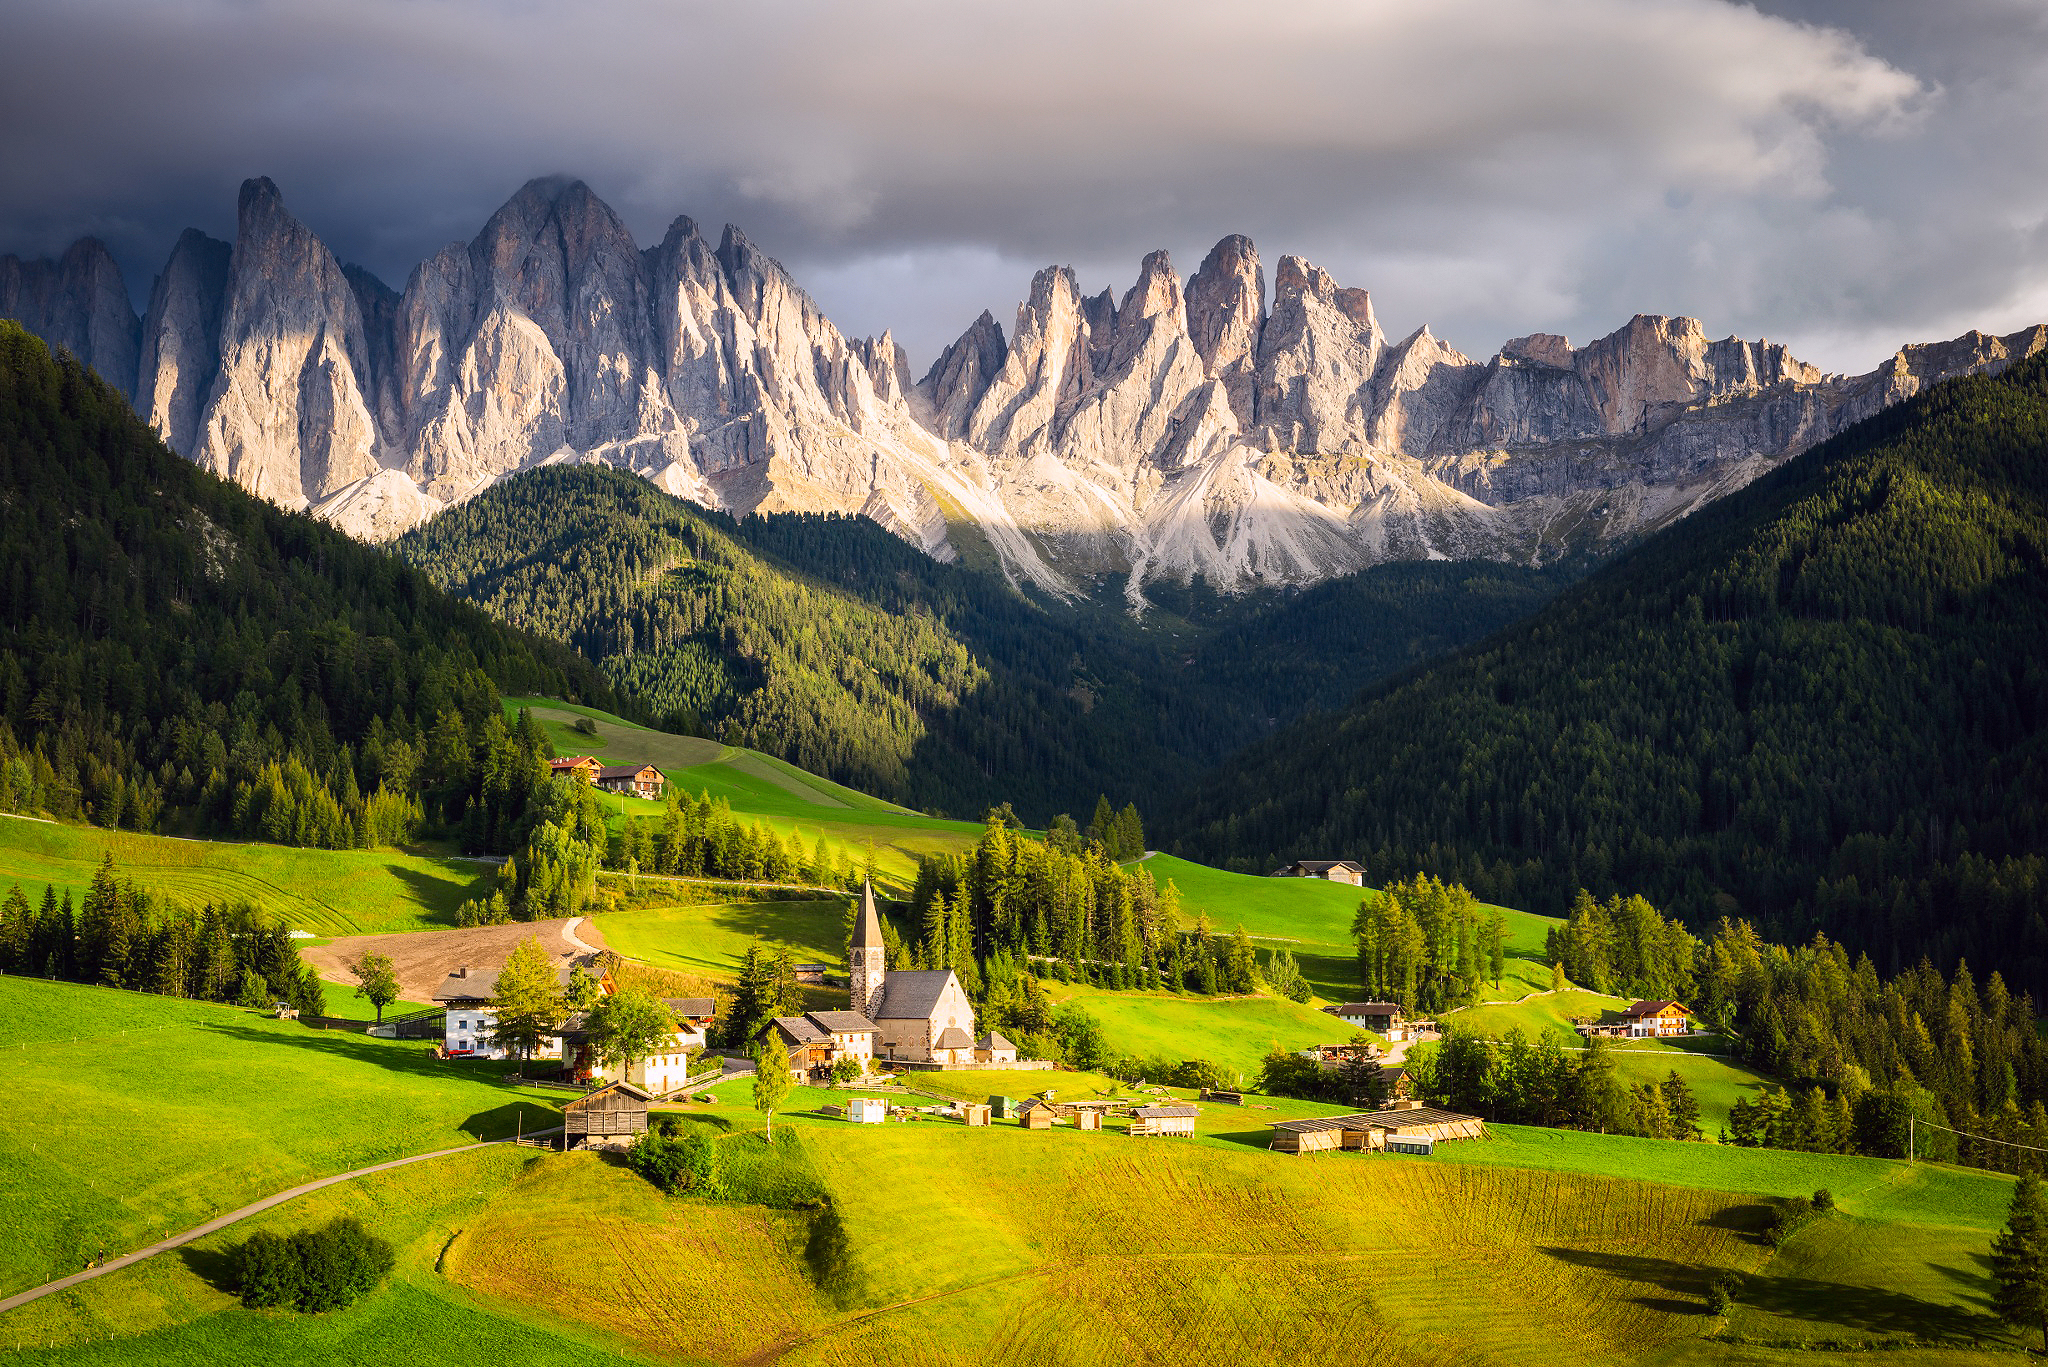 grass, nature, mountain, dolomites, italy, house, countryside, forest, alps, village, photography, landscape, earth, field, valley